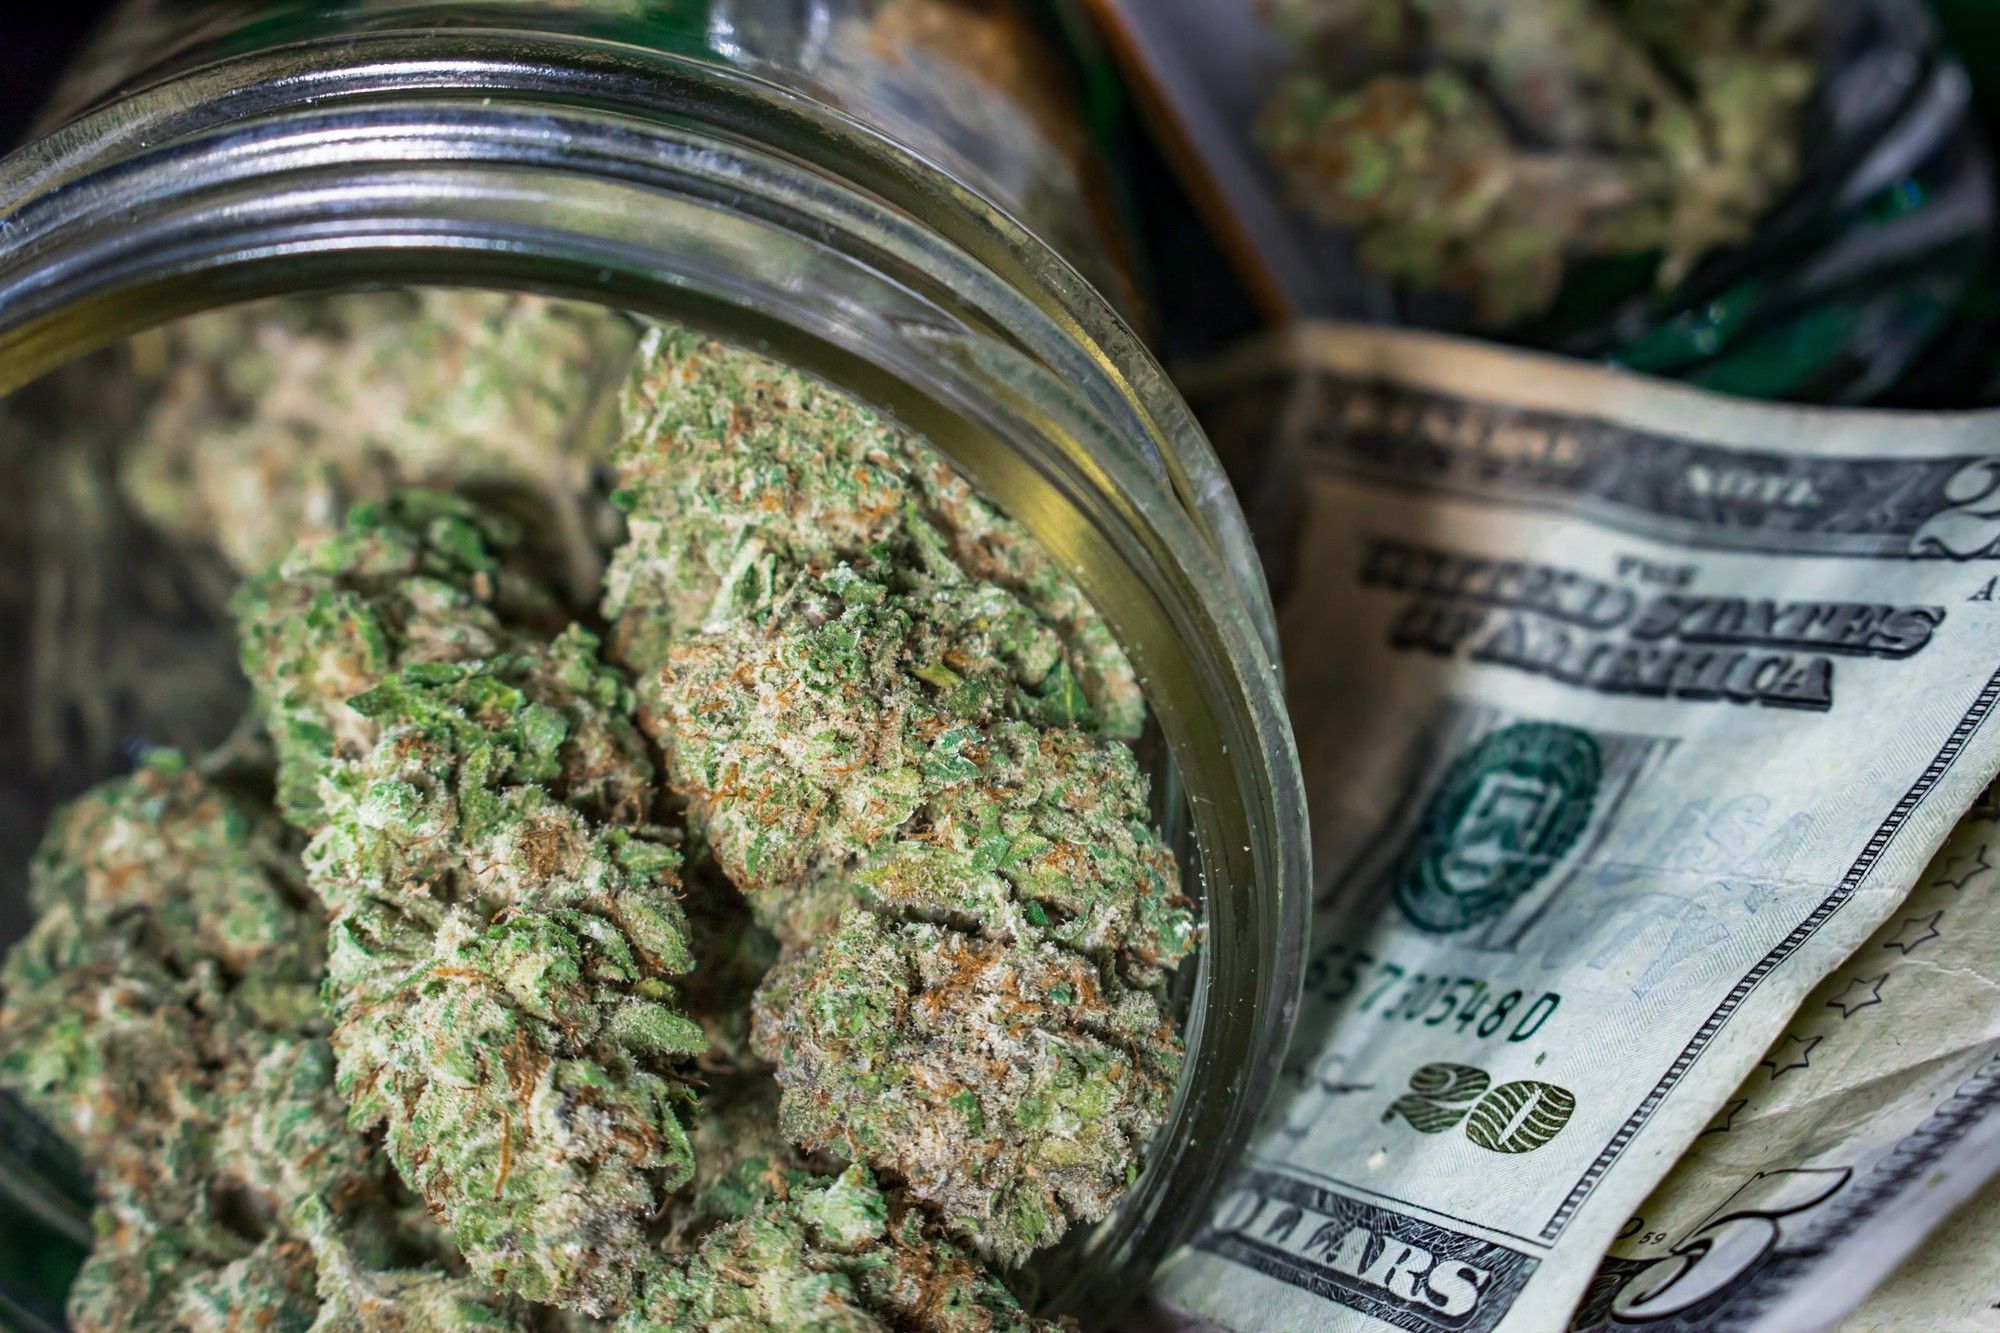 A clear jar packed with dried cannabis buds that's been tipped on its side and laid atop a small pile of cash.